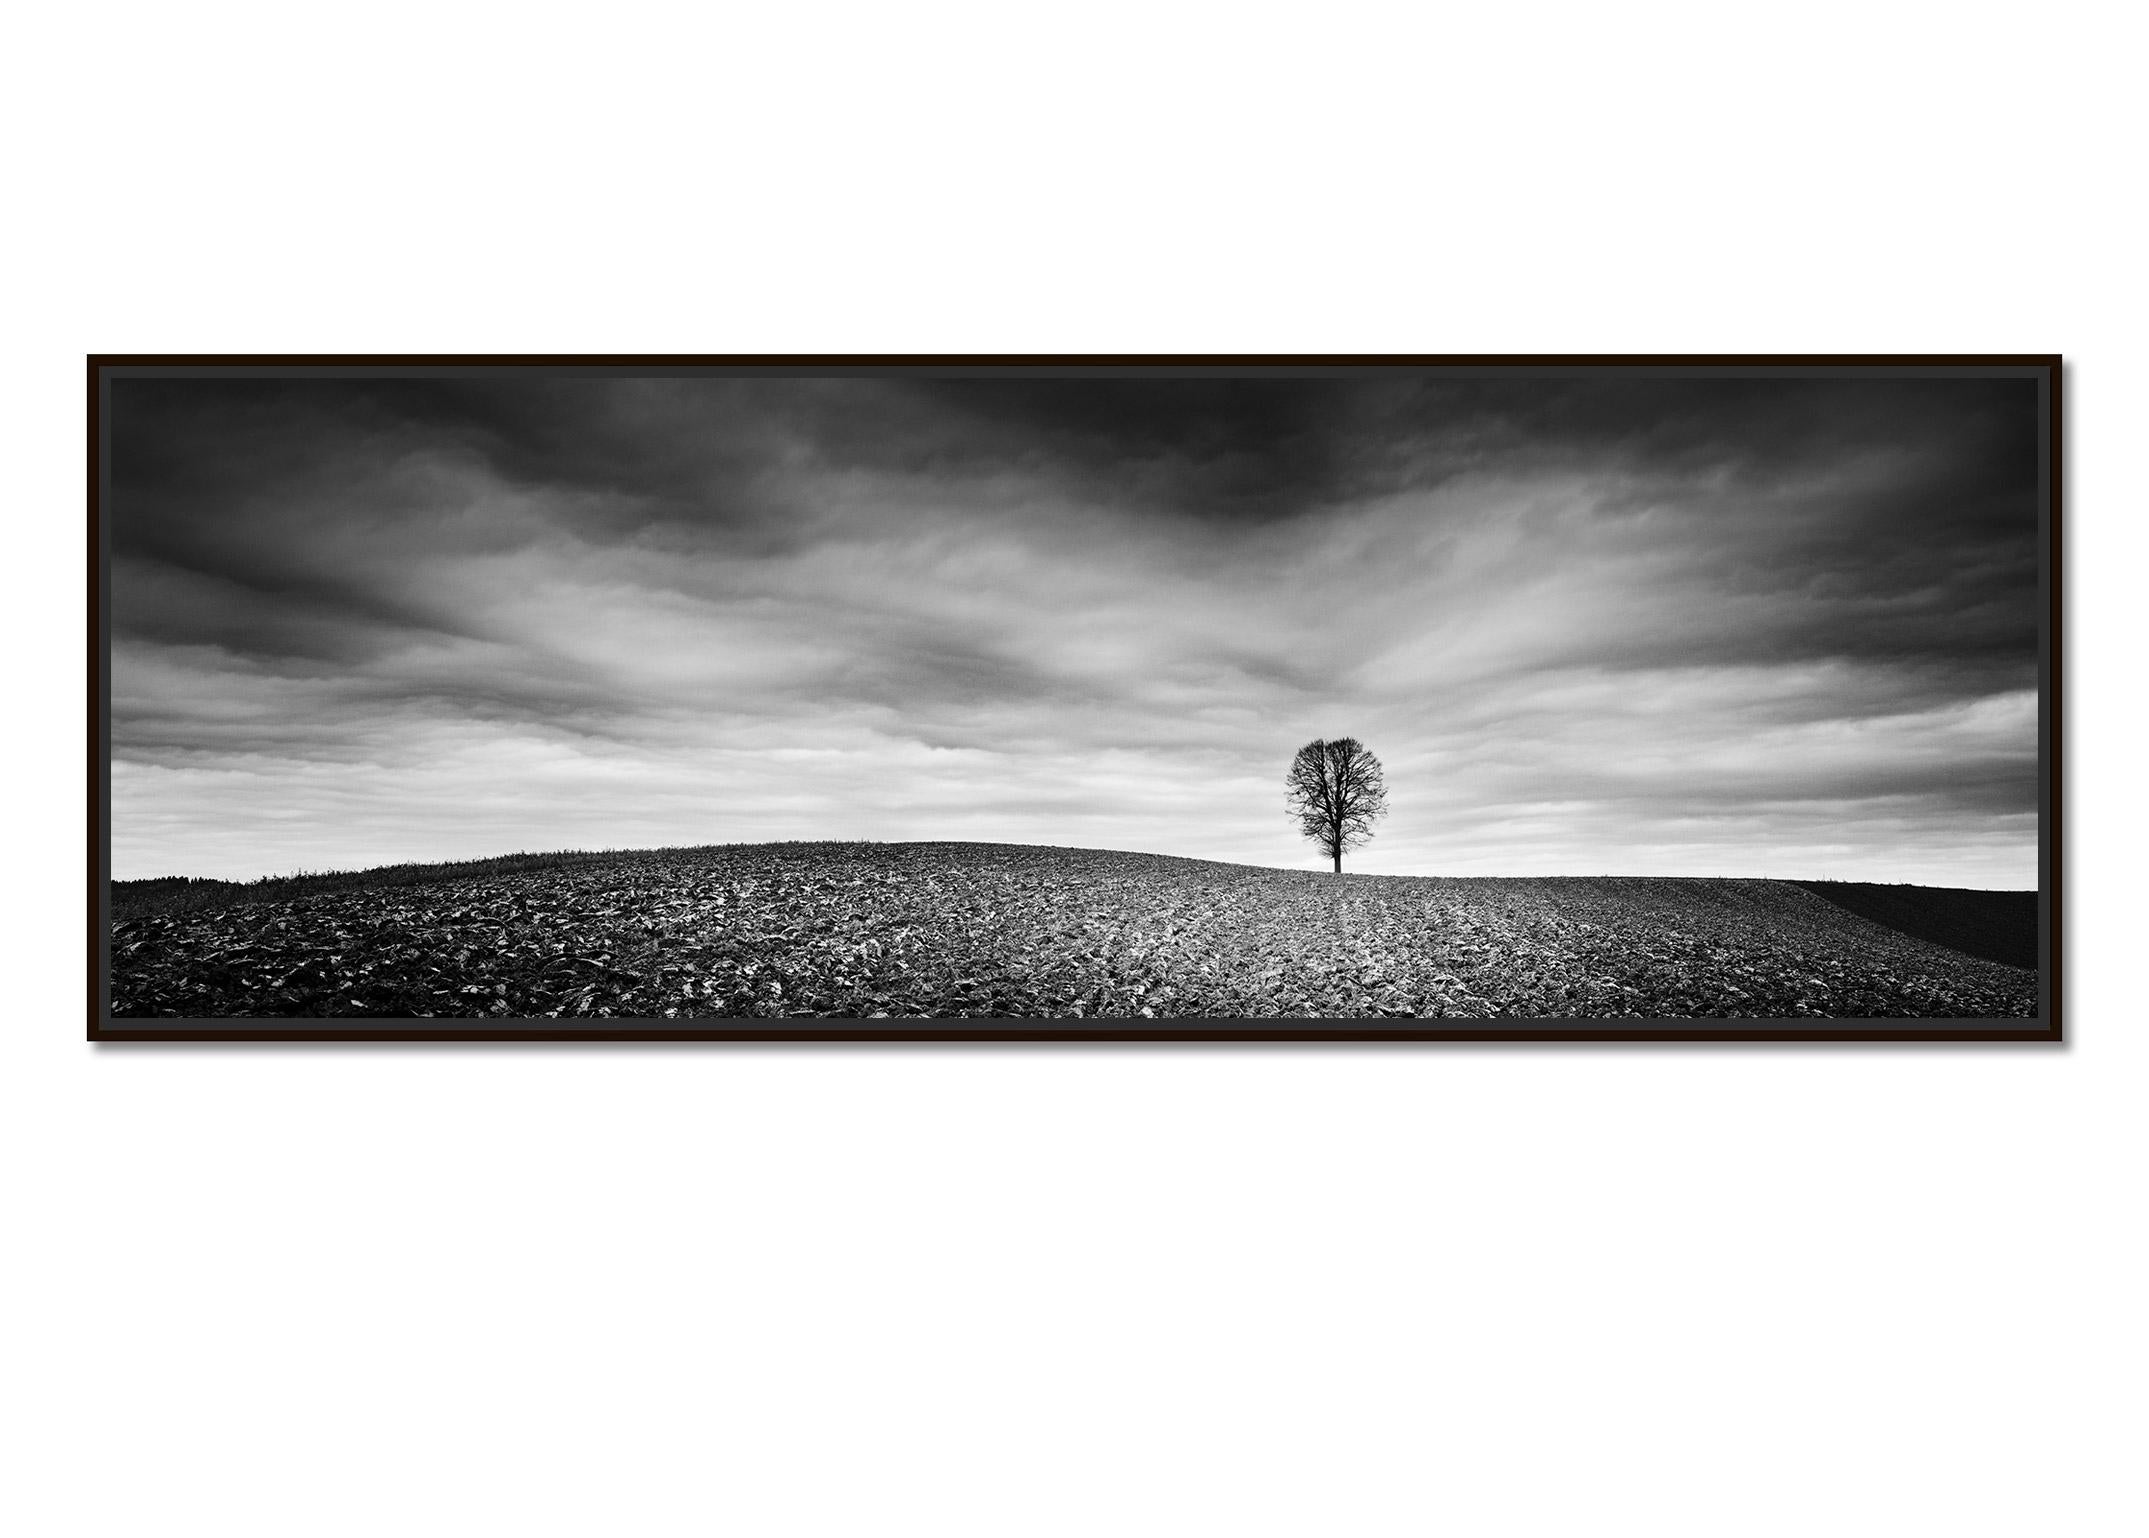 Farmland Panorama, Autumn Field, Austria, black and white photography, landscape - Photograph by Gerald Berghammer